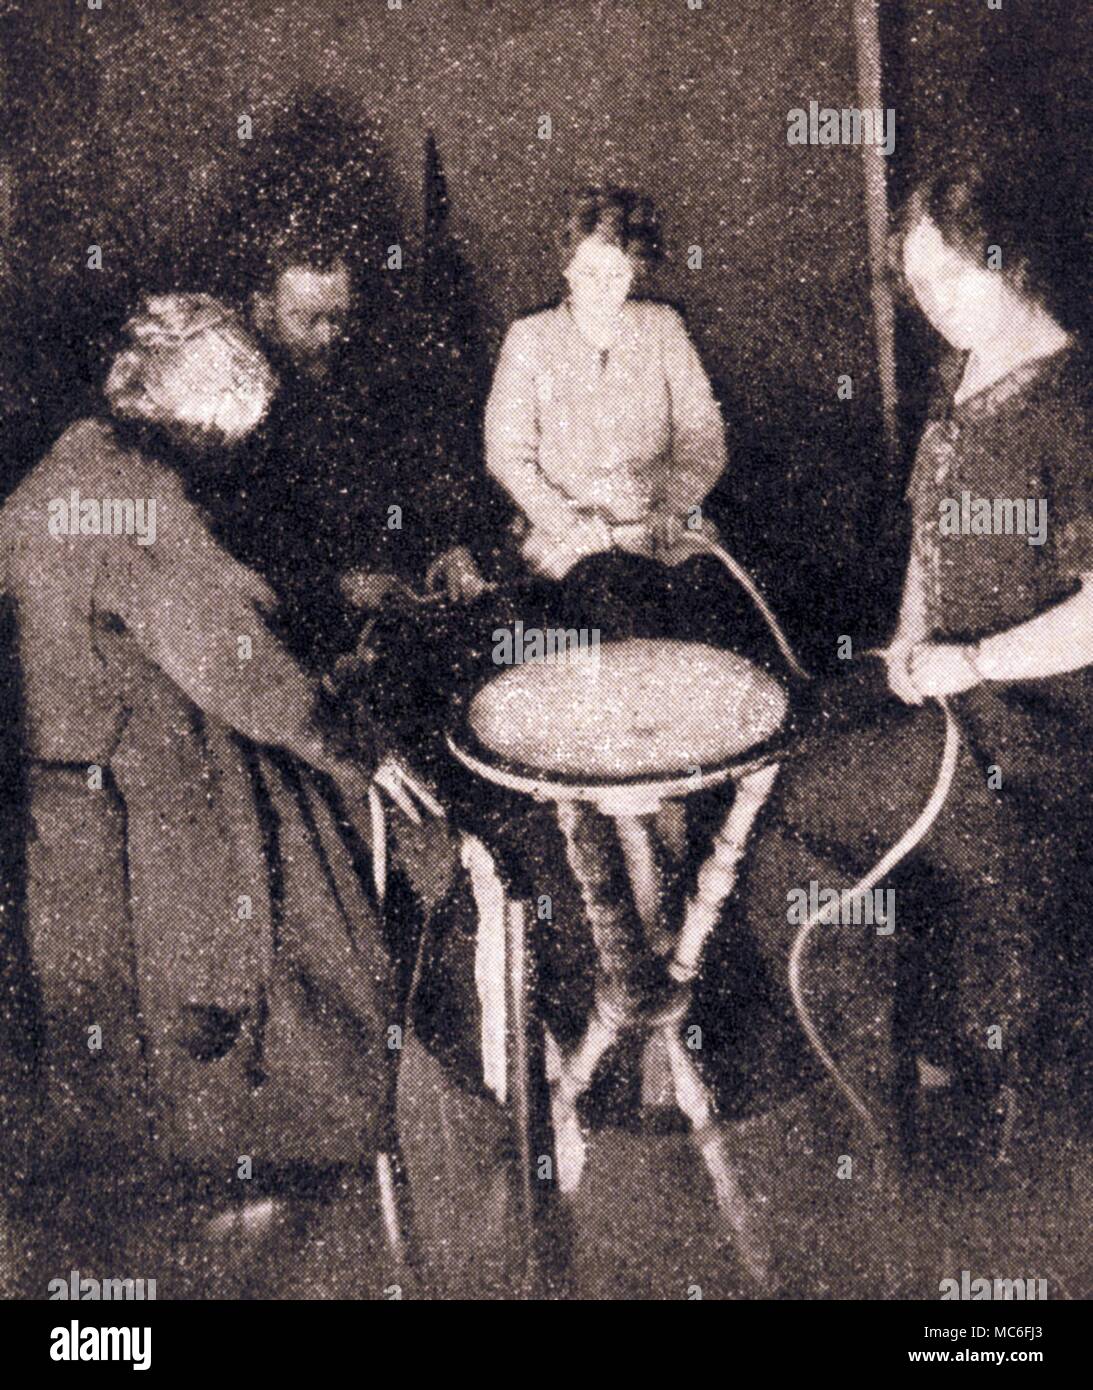 LEVITATION Flash photo taken during the Warrick-Deanne seances on 21 April 1925. The table was levitating dramatically as the picture was taken Stock Photo